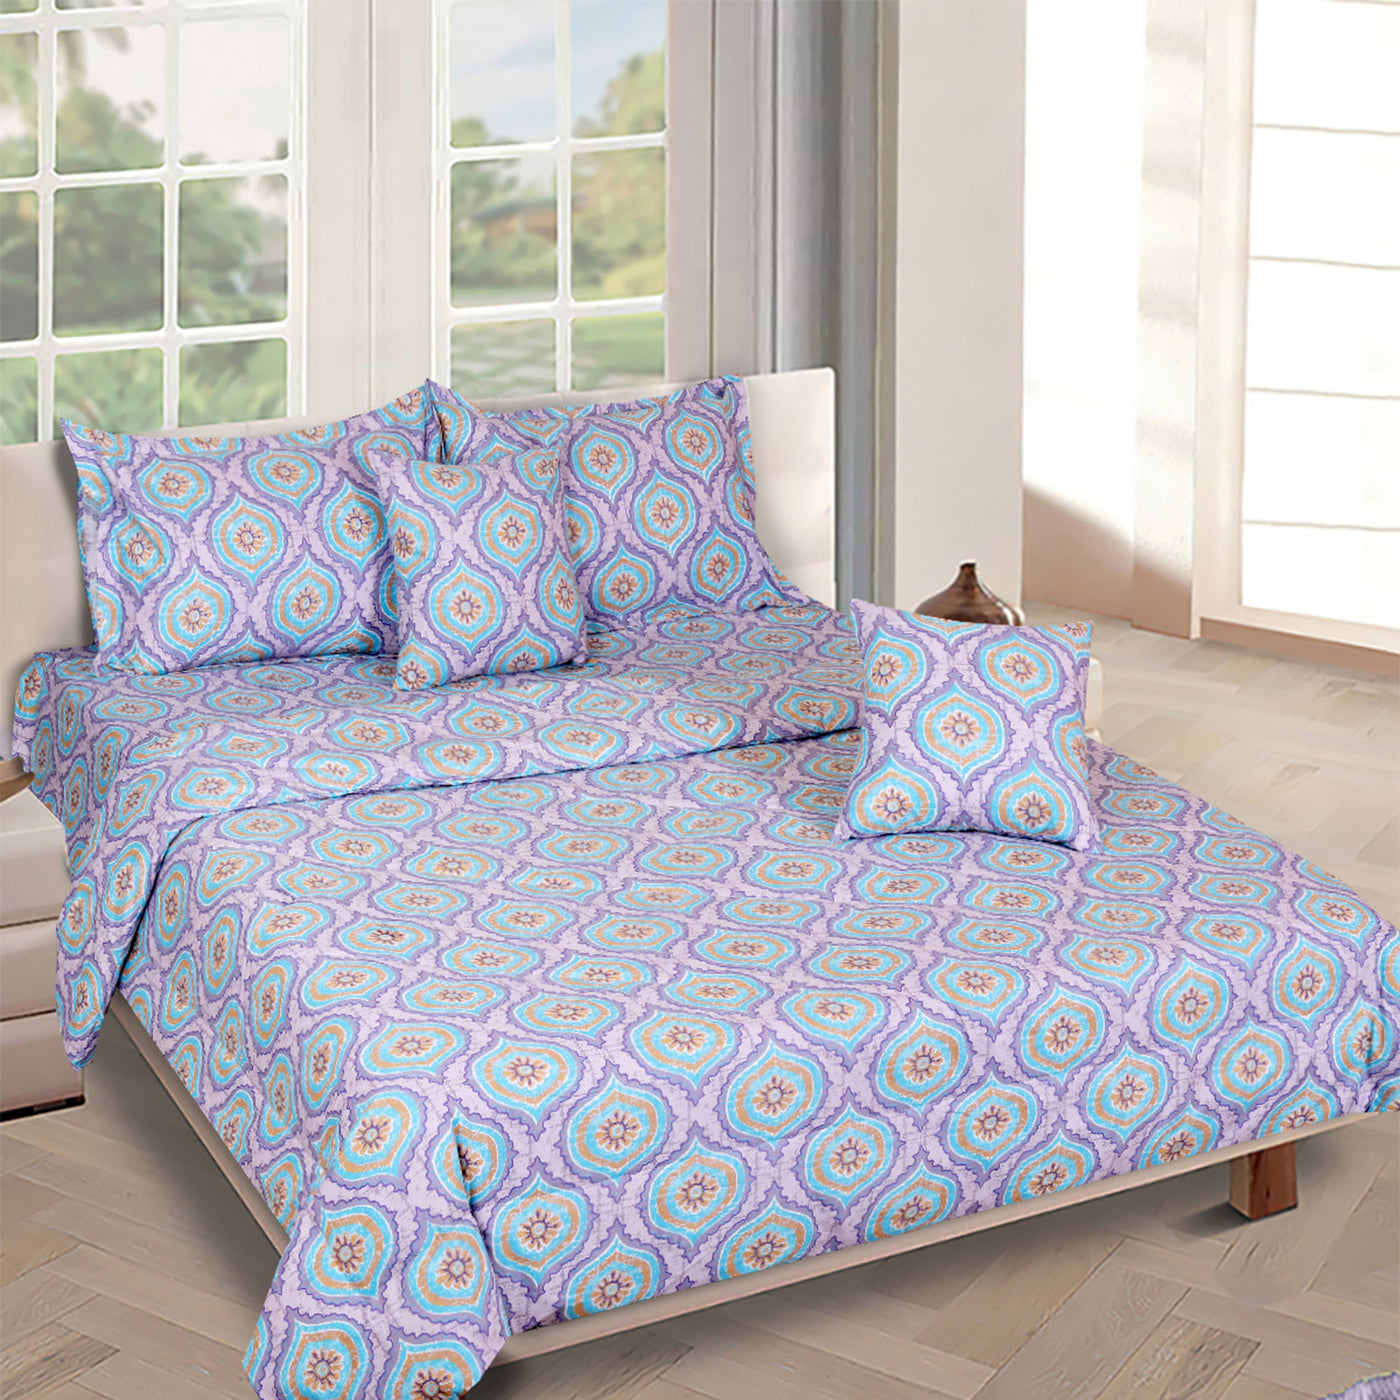 Blue Ethnic Motifs Printed Cotton Double Queen Bedding Set With Pillow Cover